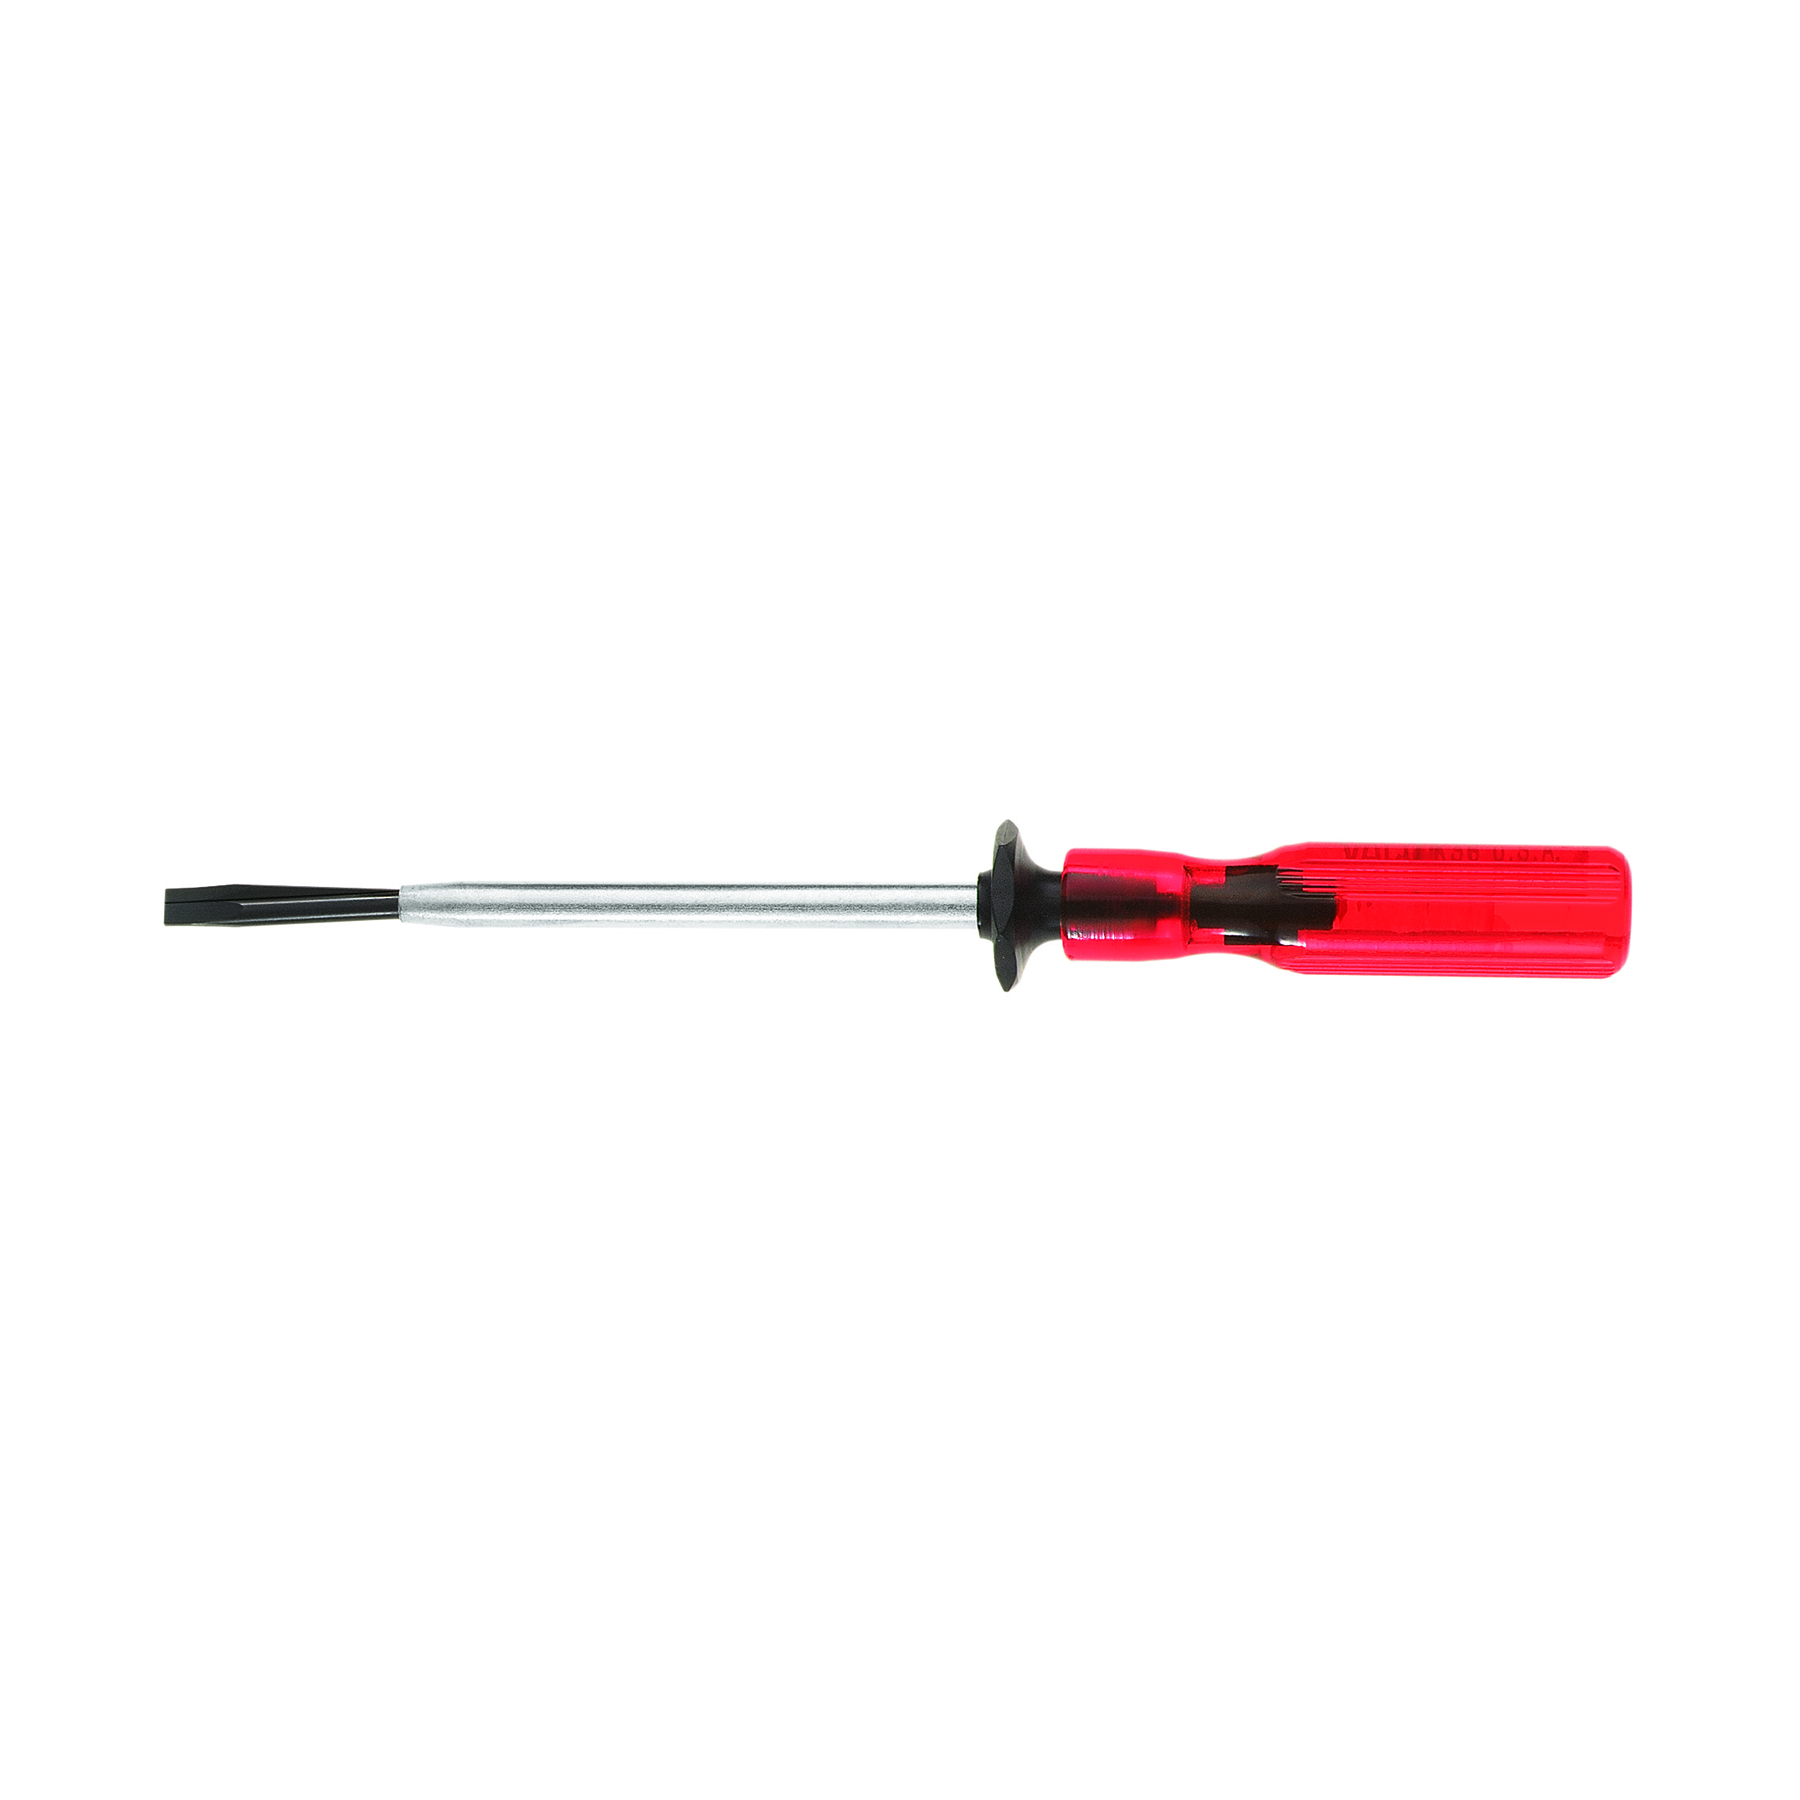 5MM SLOTTED SCREW-HOLDING SCREWDRIVER